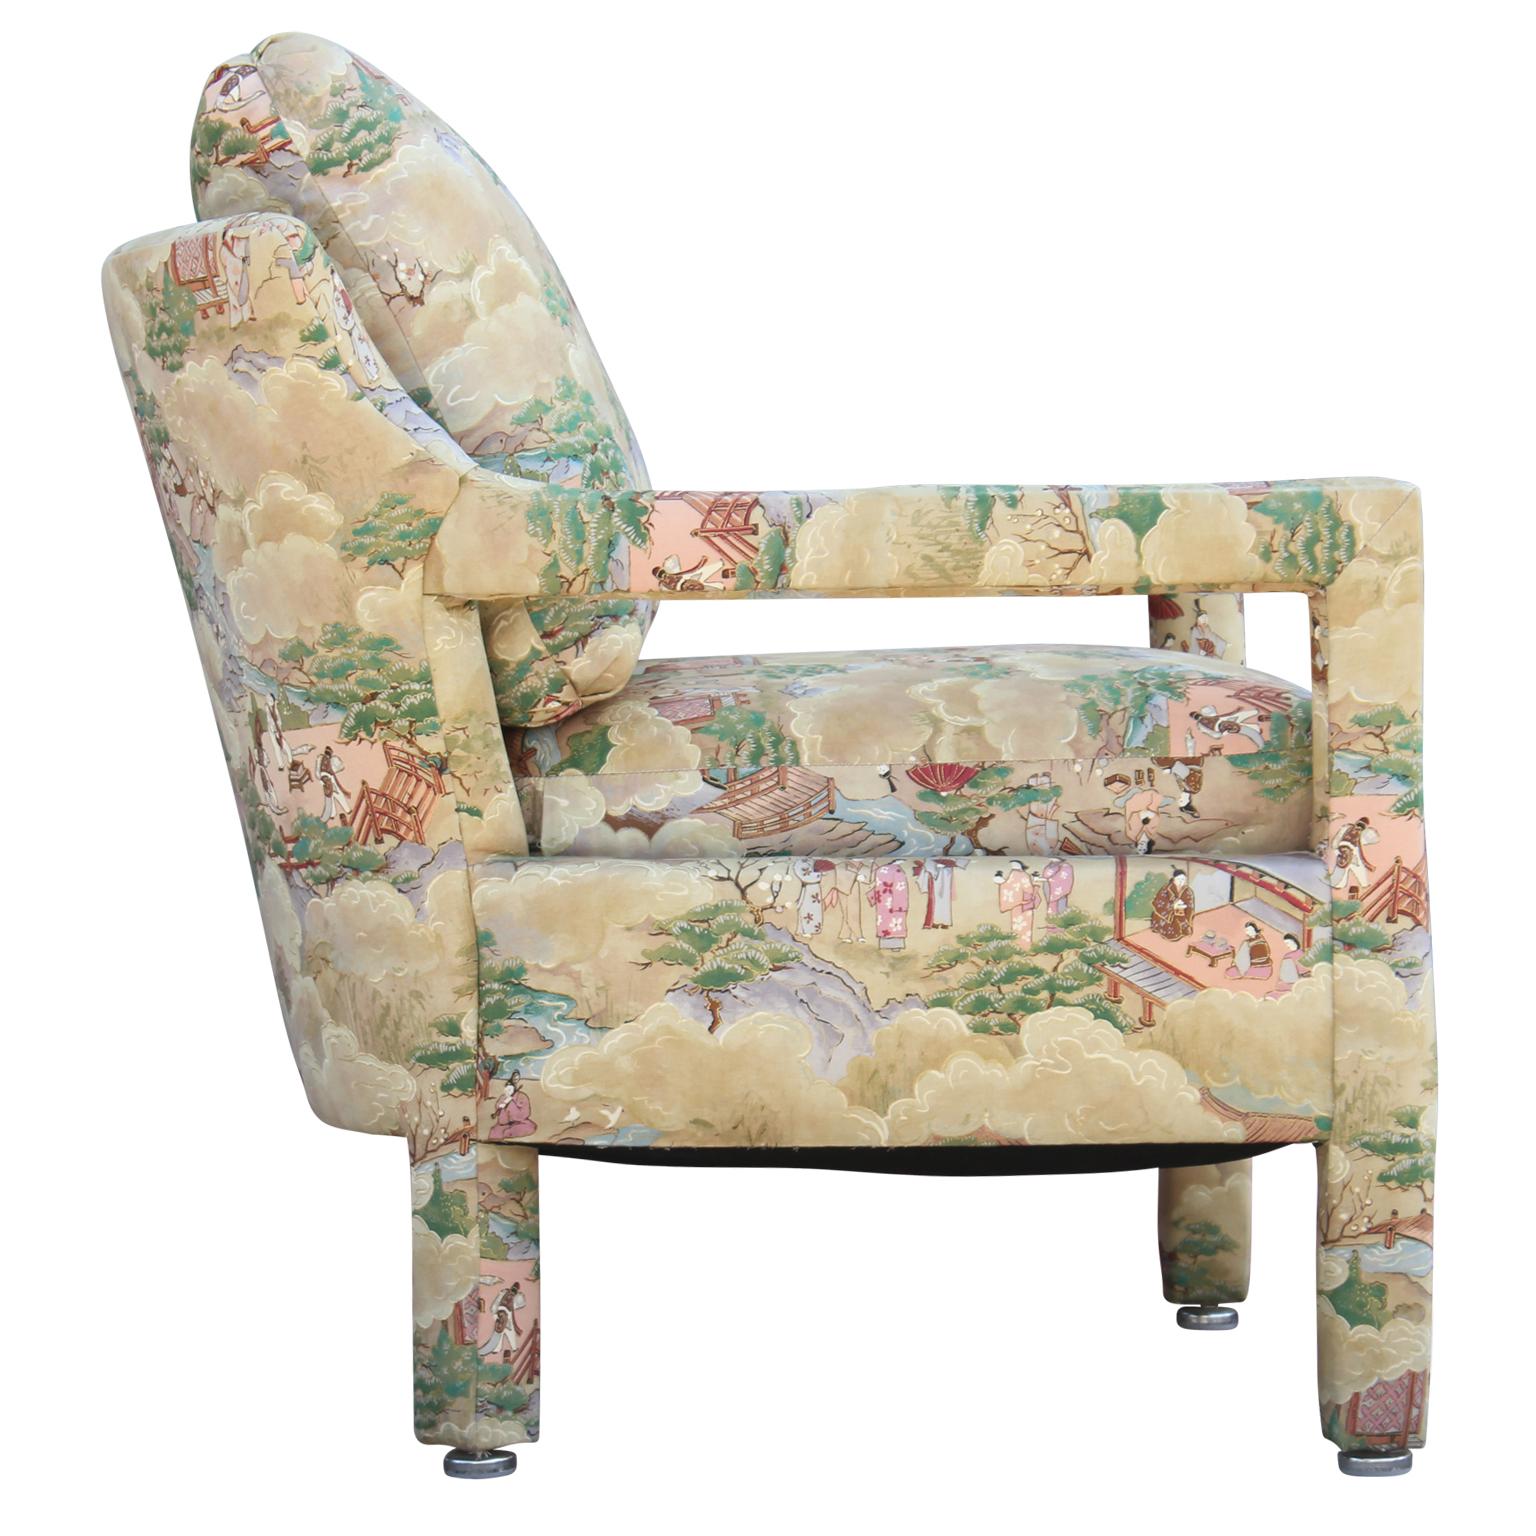 Set of Two Modern Barrel Back Lounge Chairs with Chinoiserie Landscape Fabric 1